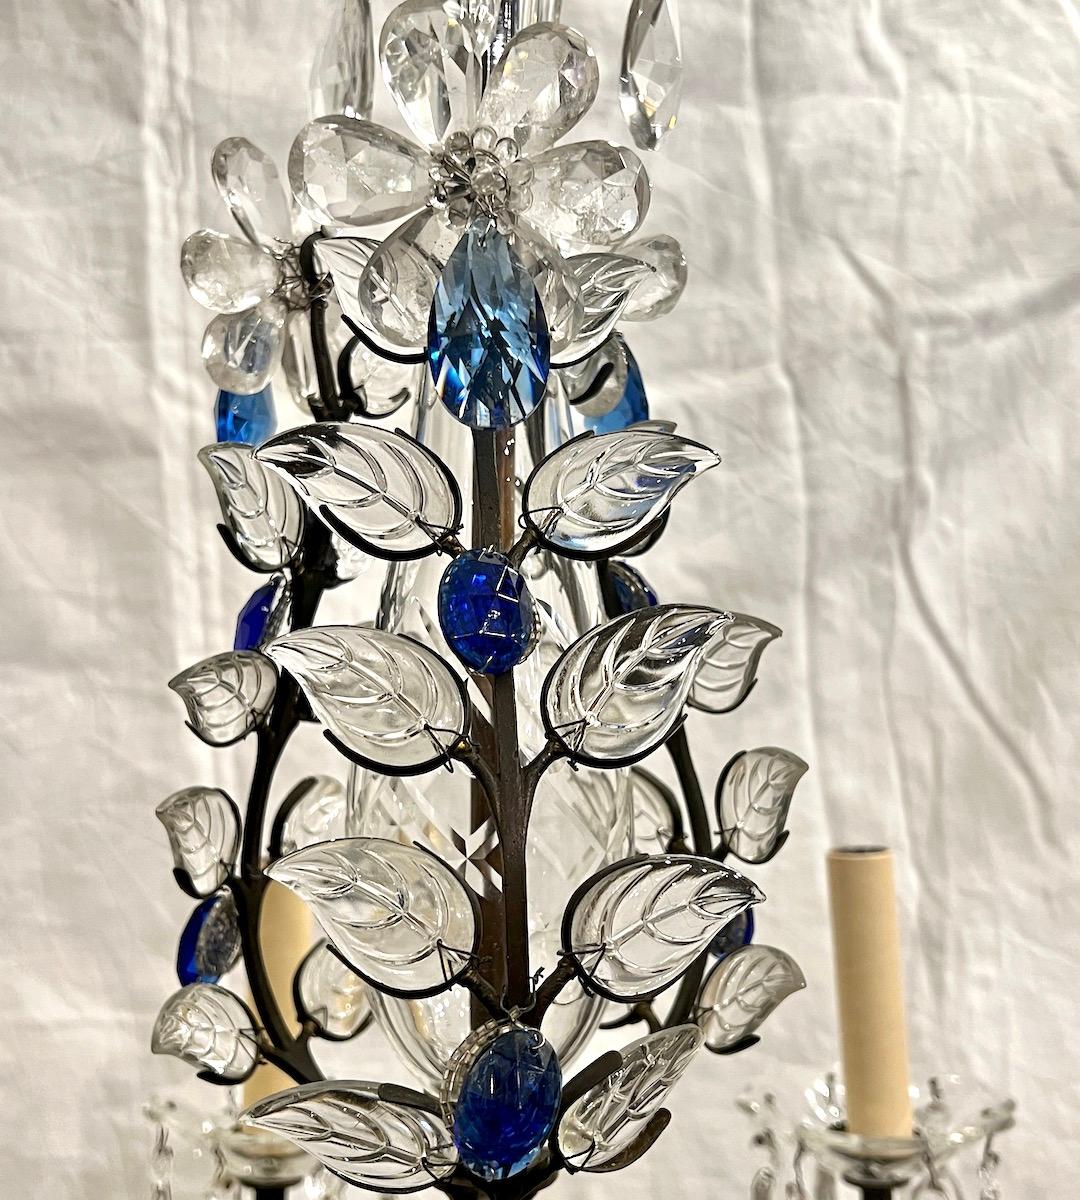 A circa 1950's patinated bronze chandelier with molded glass leaves and rock crystal flowers.

Measurements:
Current drop: 27